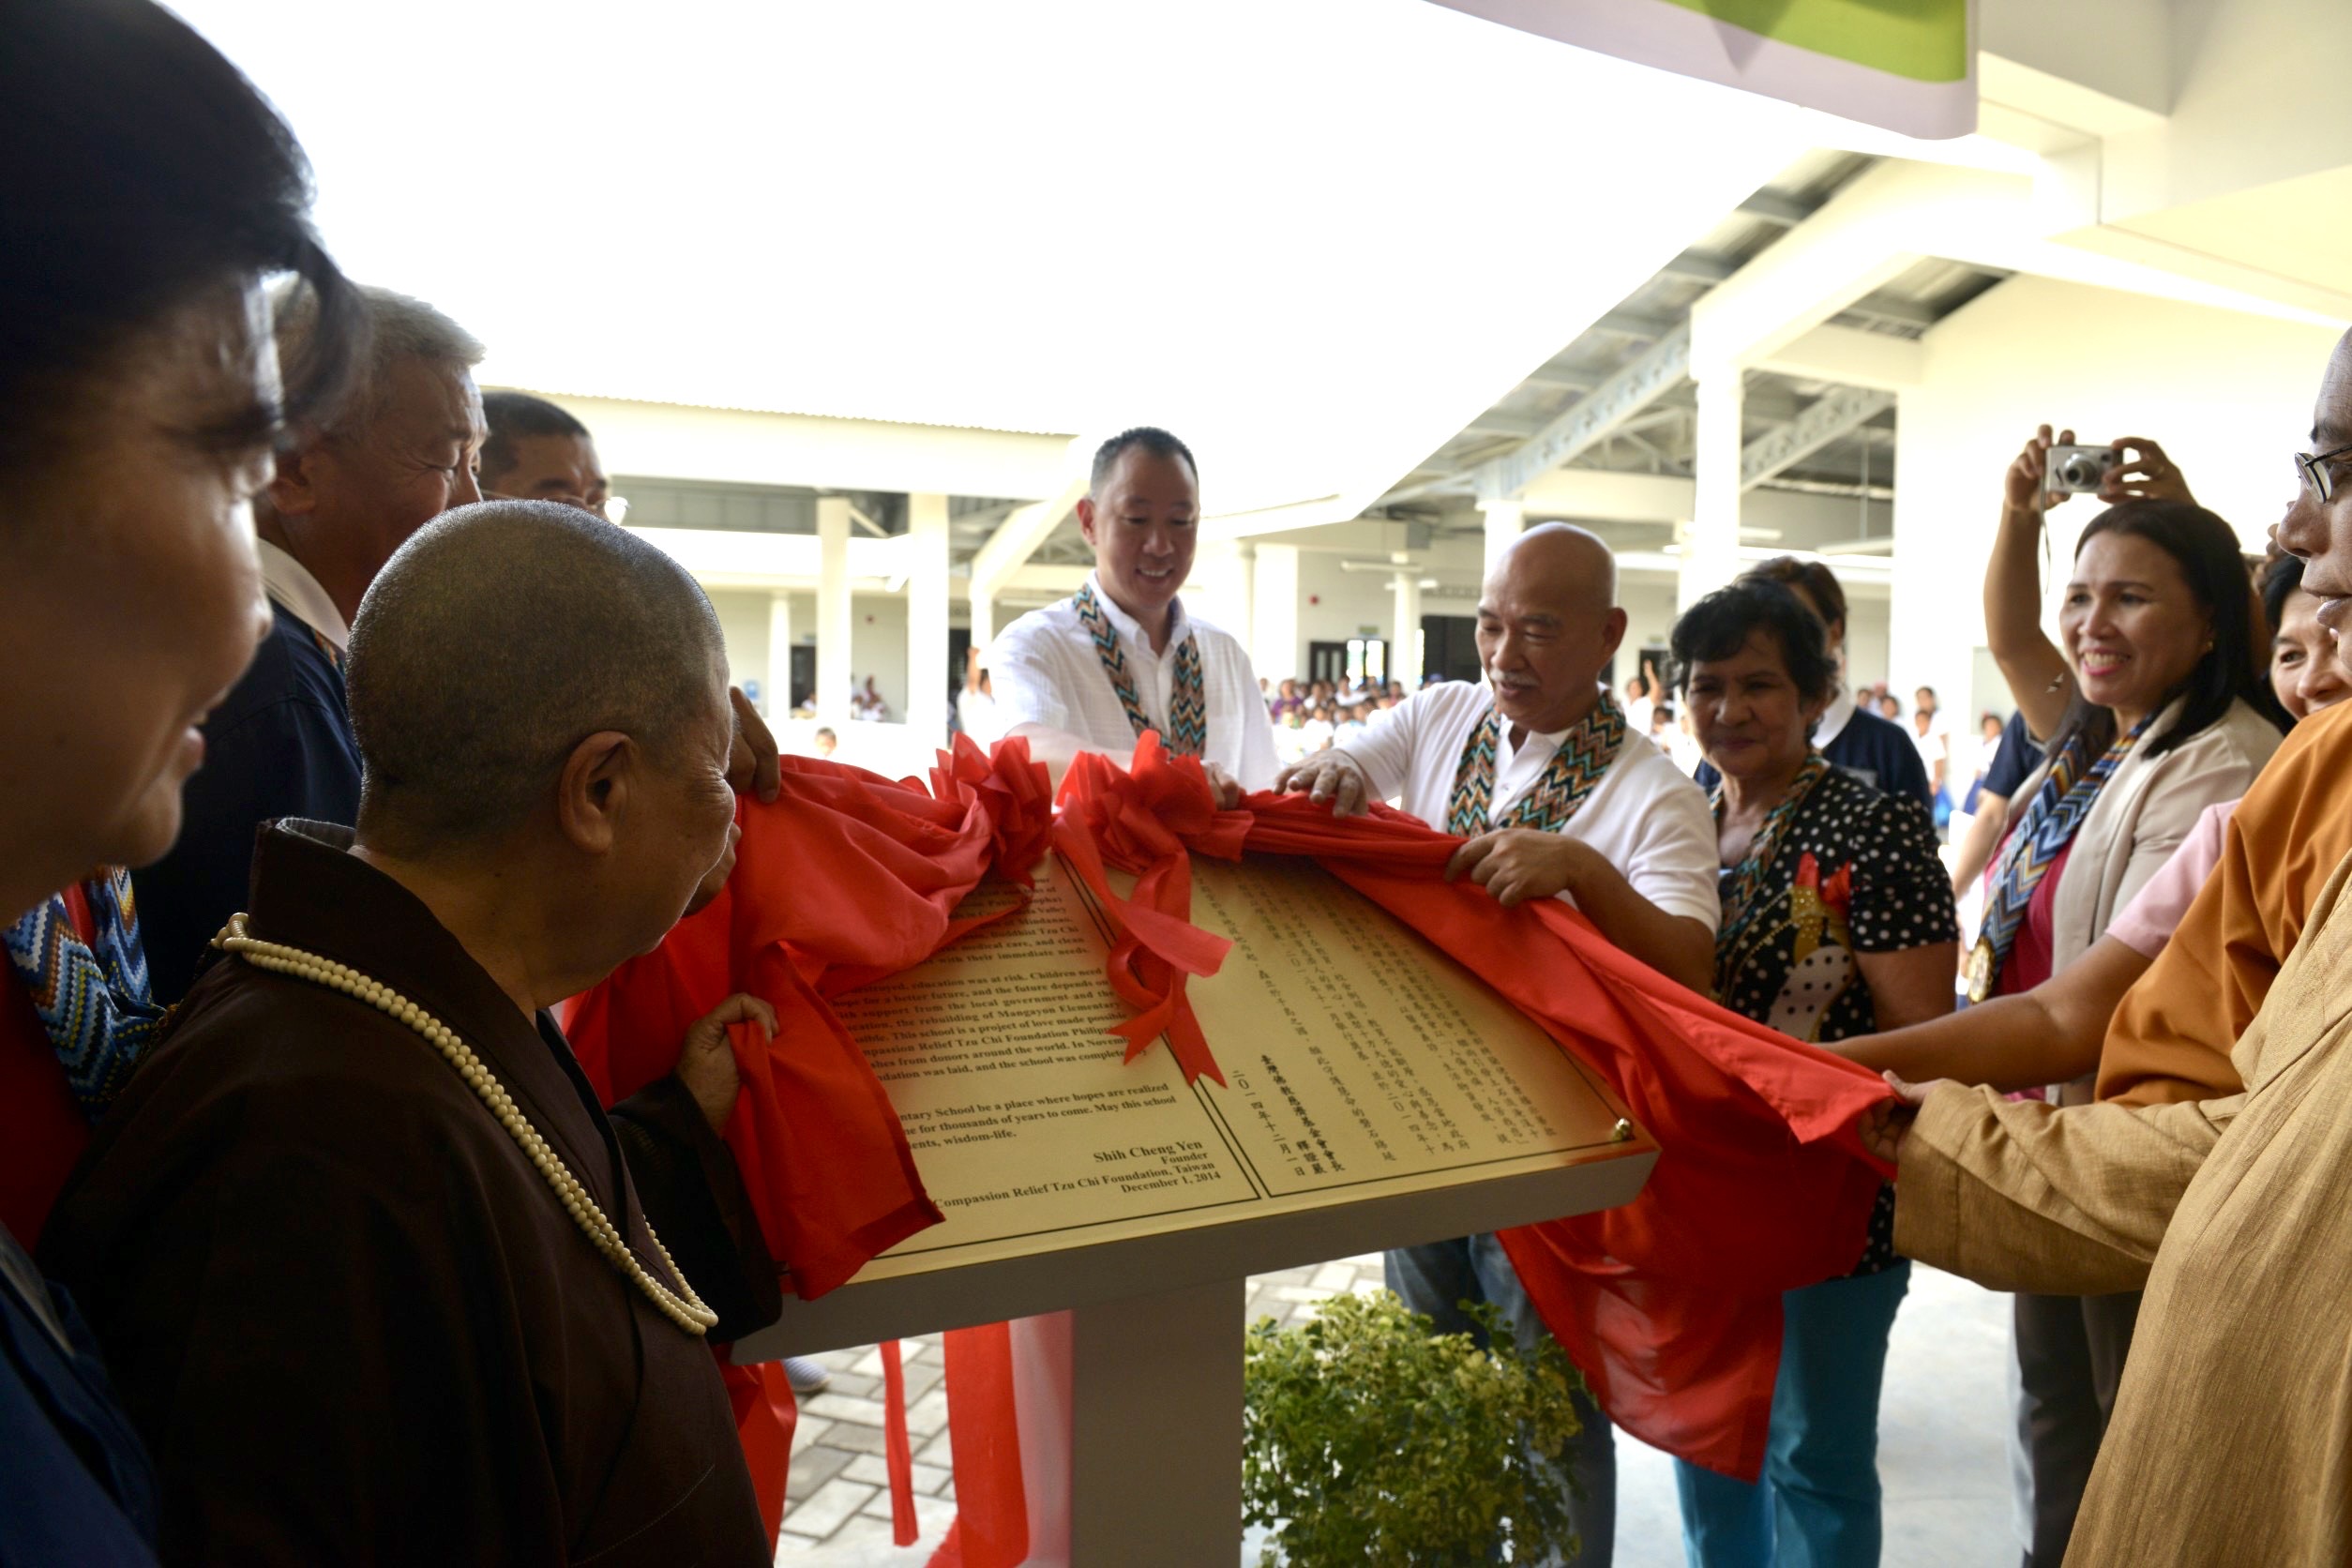 Special guests unveil a marker at Mangayon Elementary School with a message engraved in English and Chinese by Dharma Master Cheng Yen during the turnover ceremony of Mangayon Elementary School on December 1, 2014.